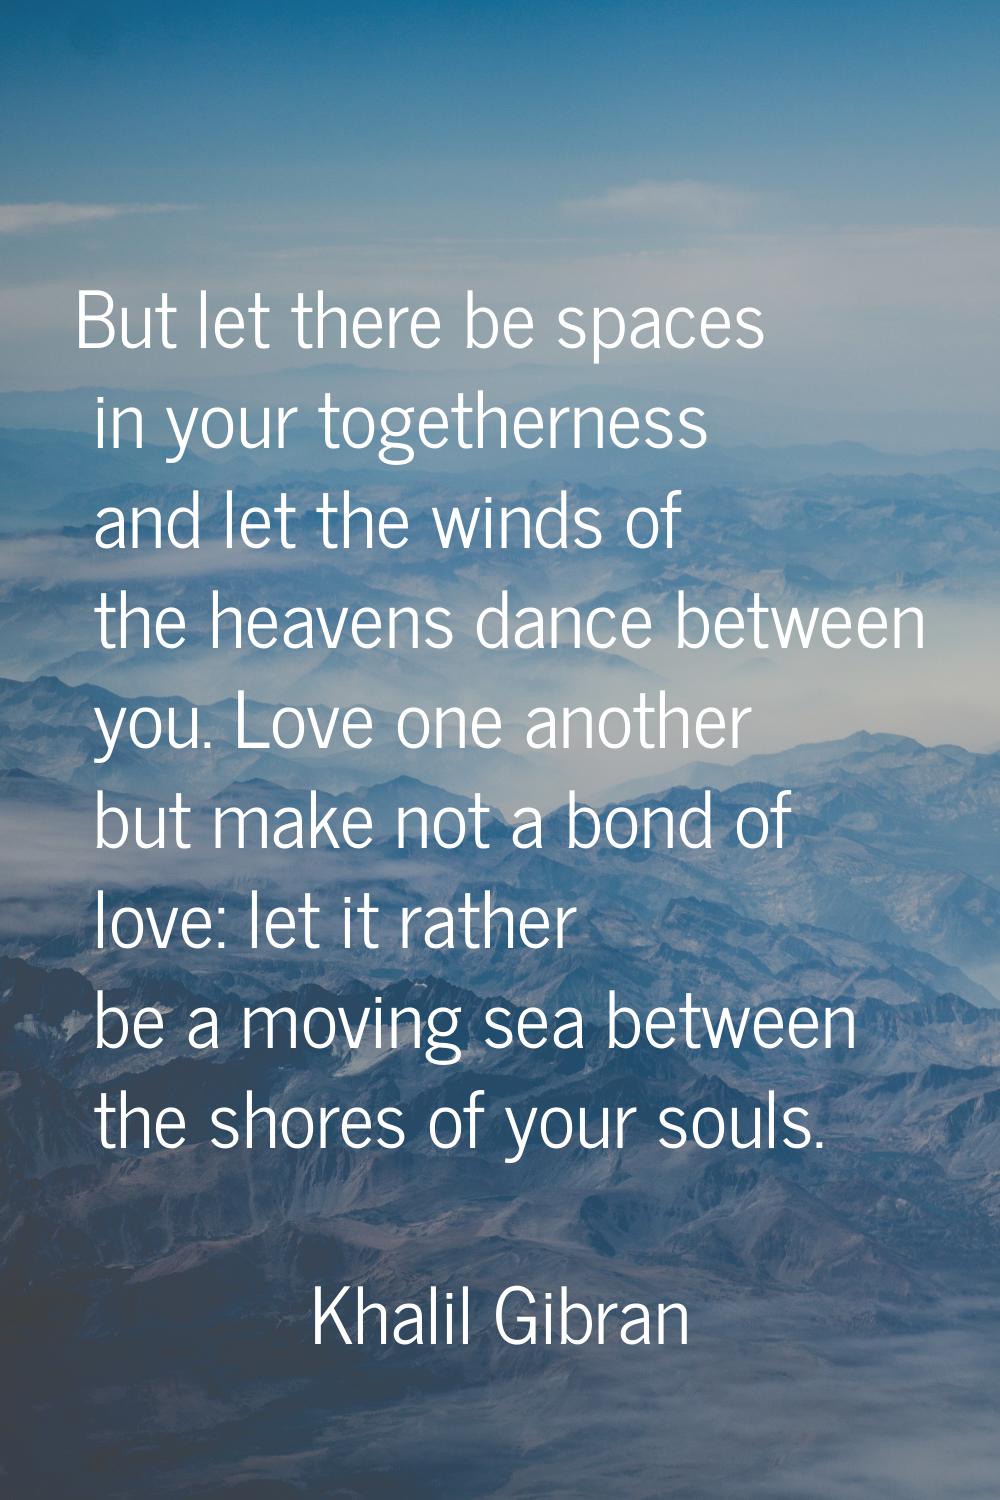 But let there be spaces in your togetherness and let the winds of the heavens dance between you. Lo